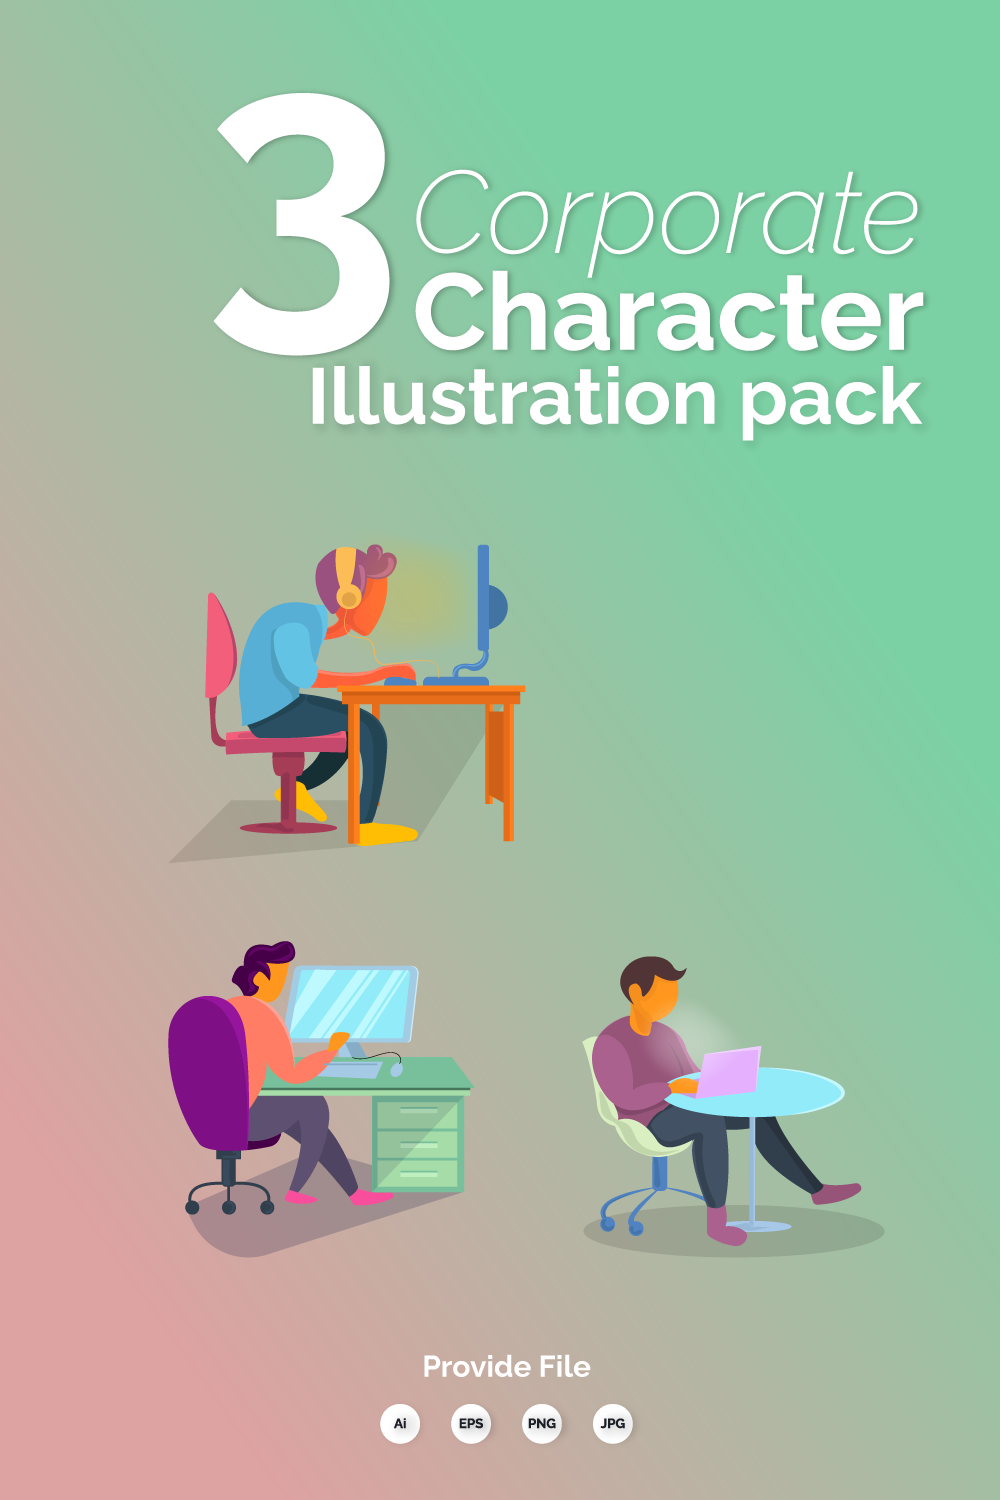 Corporate Character Illustration pack pinterest preview image.